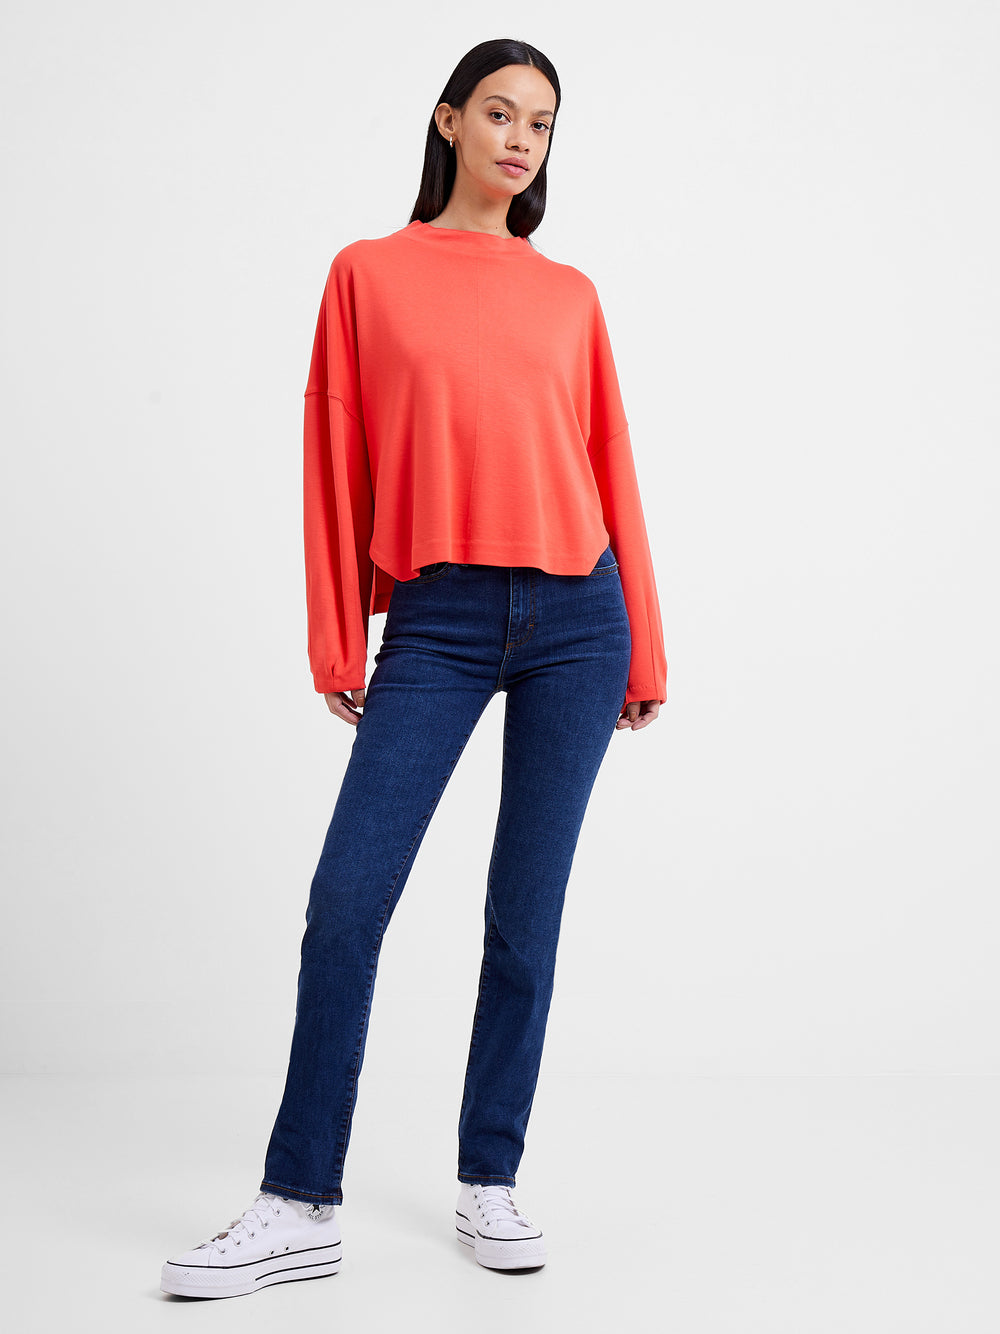 Suzie Beau Long Sleeve Top BITTERSWEET | French Connection UK